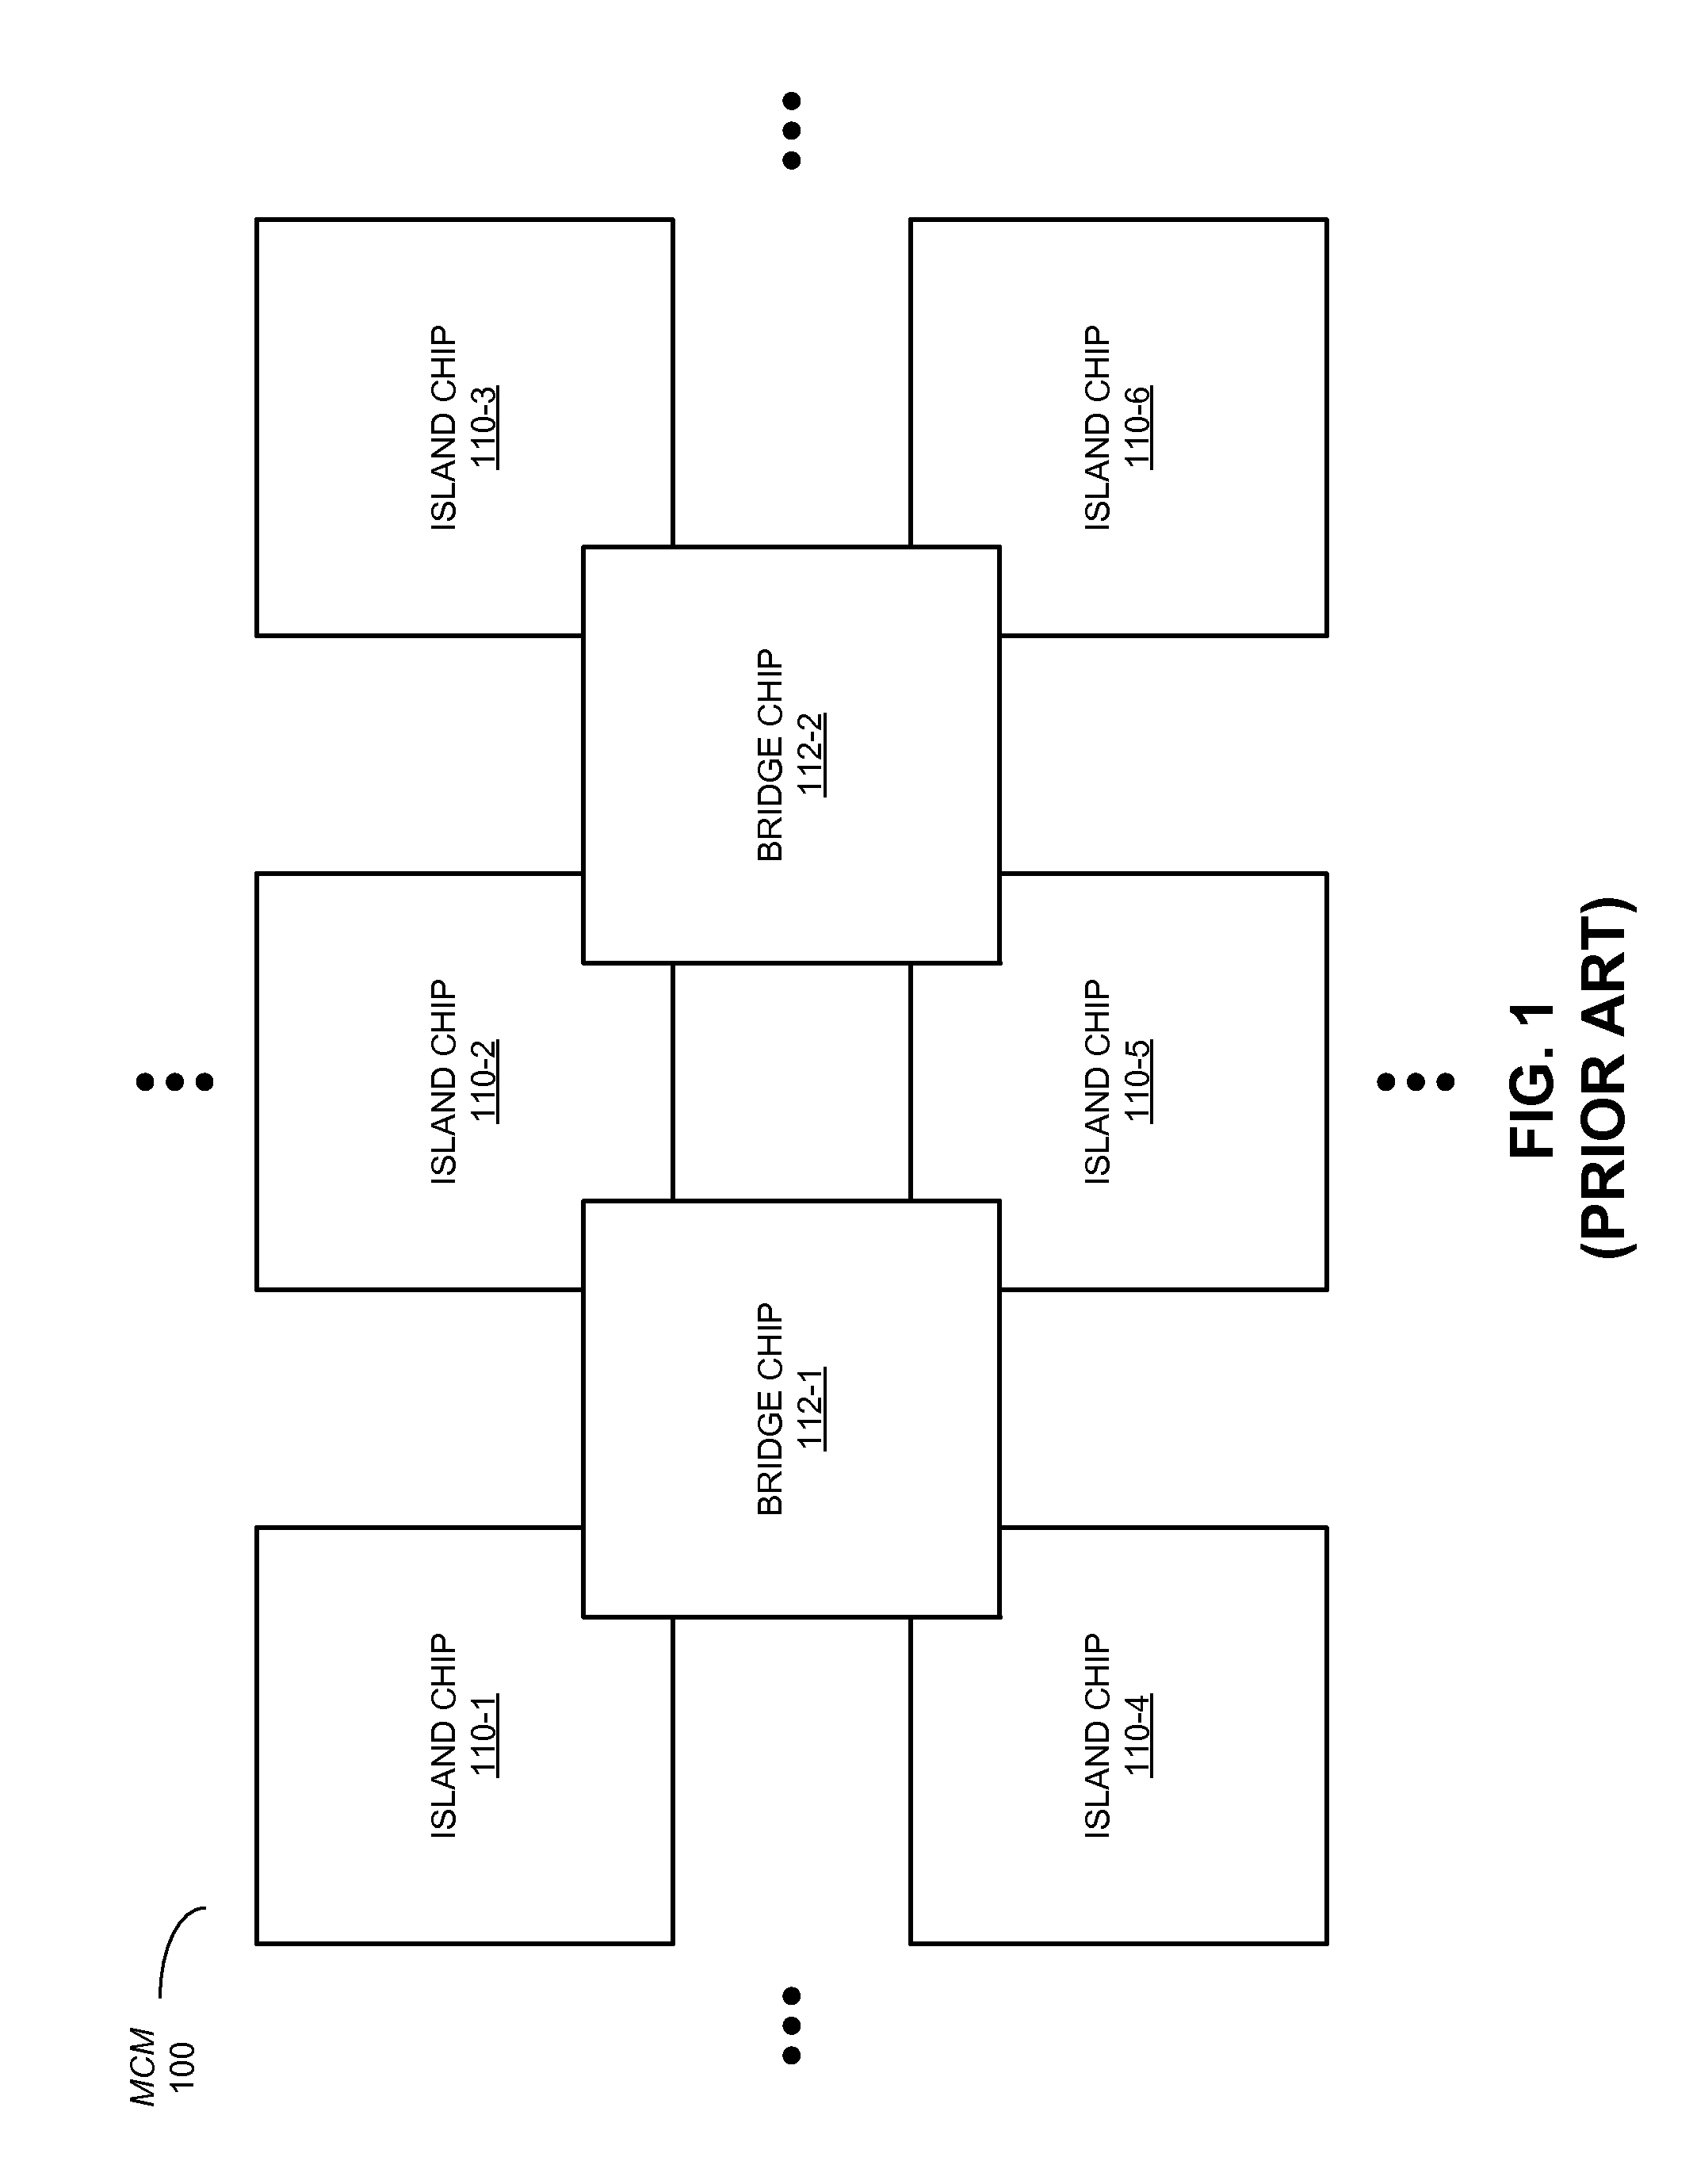 Three-dimensional macro-chip including optical interconnects